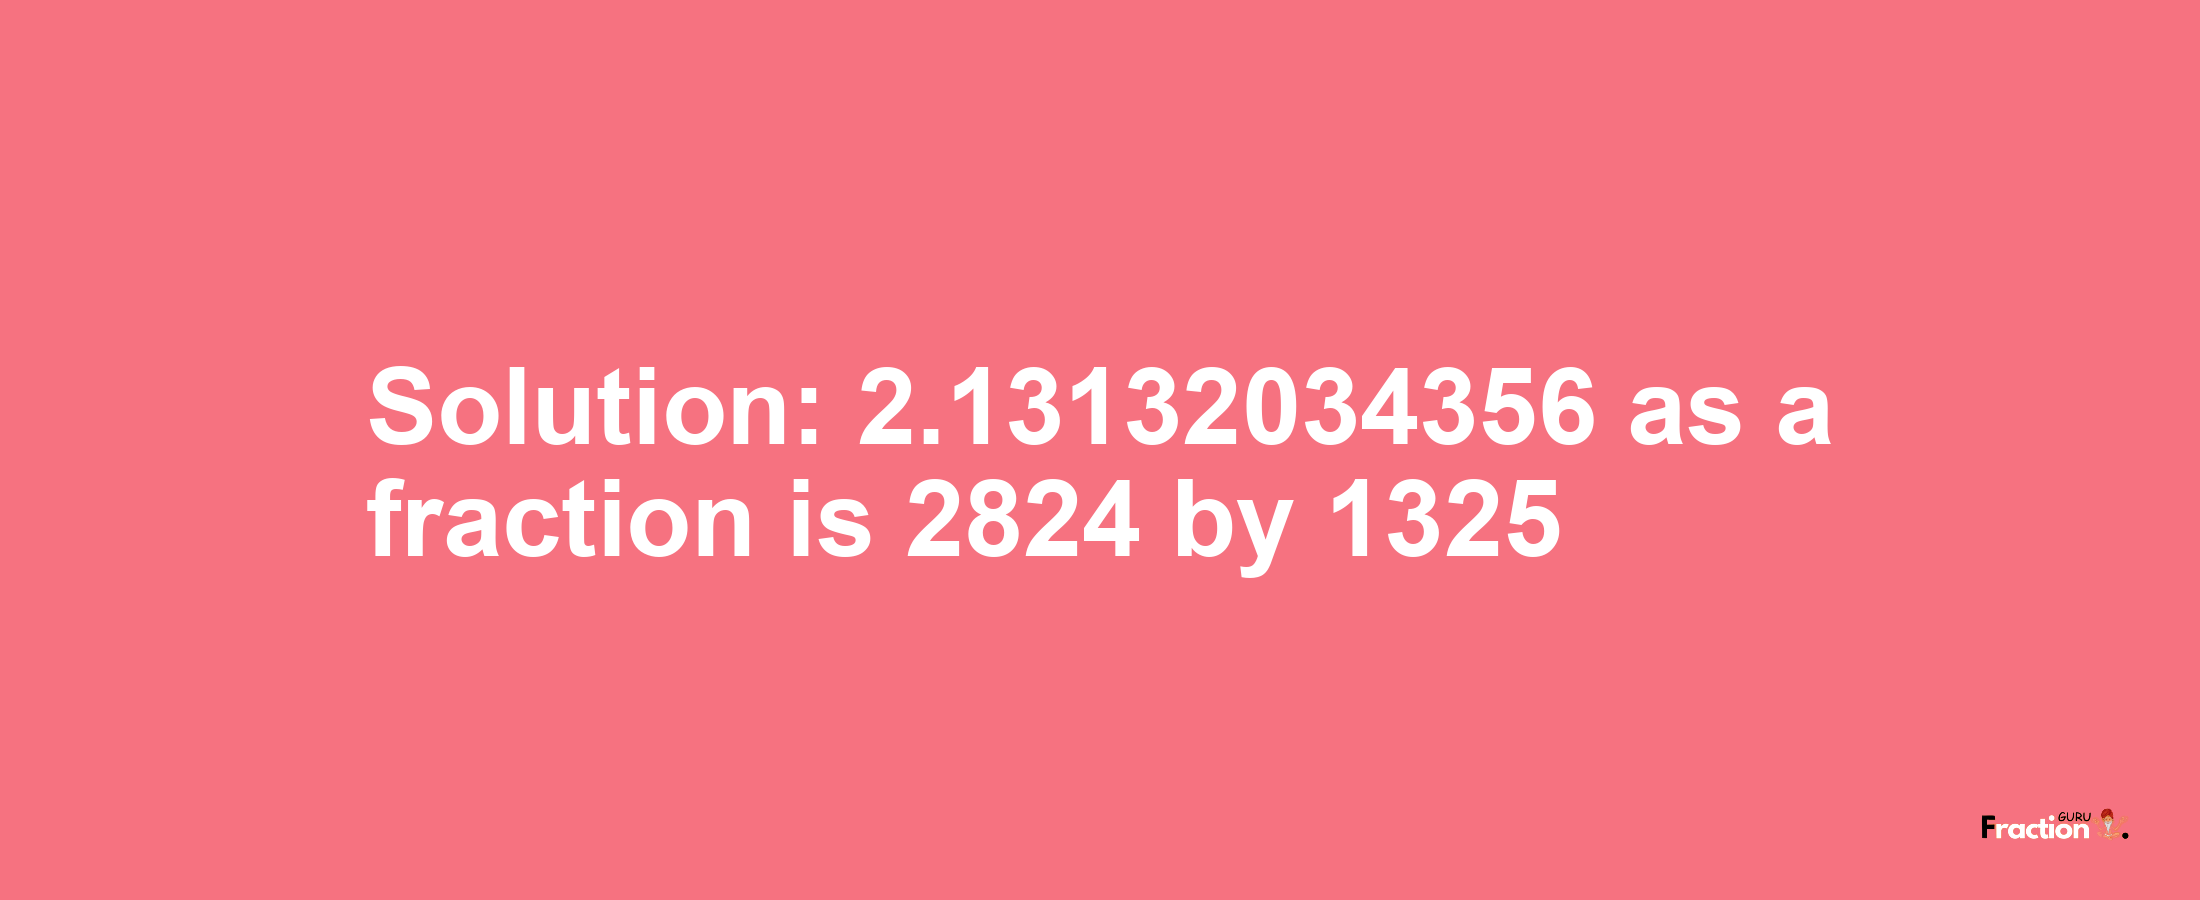 Solution:2.13132034356 as a fraction is 2824/1325